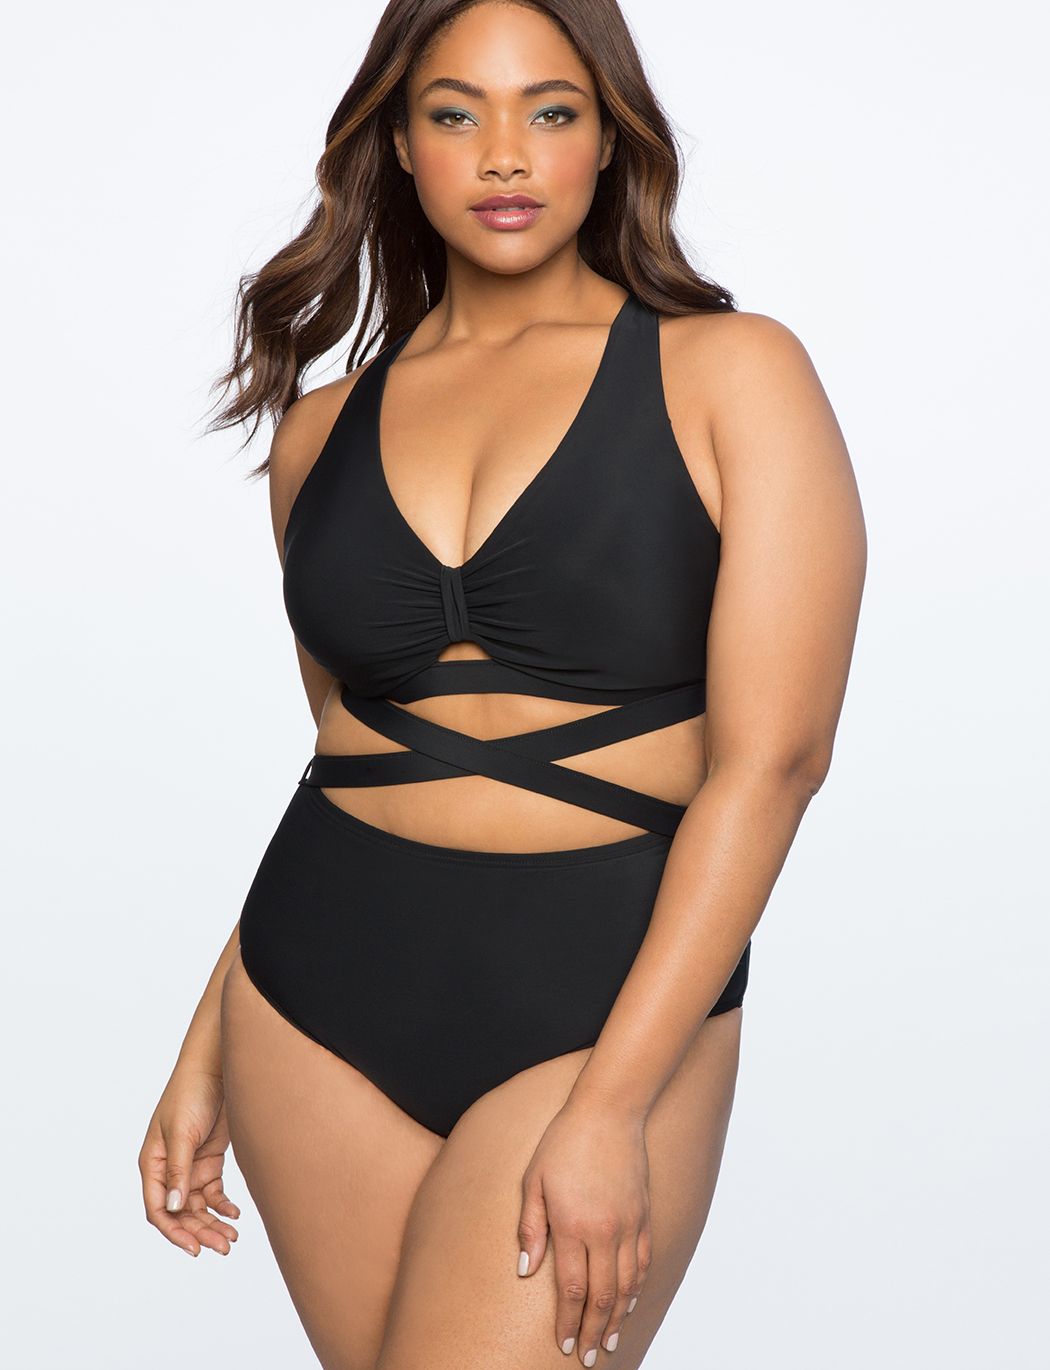 don’t sleep on eloquii’s swim section this year